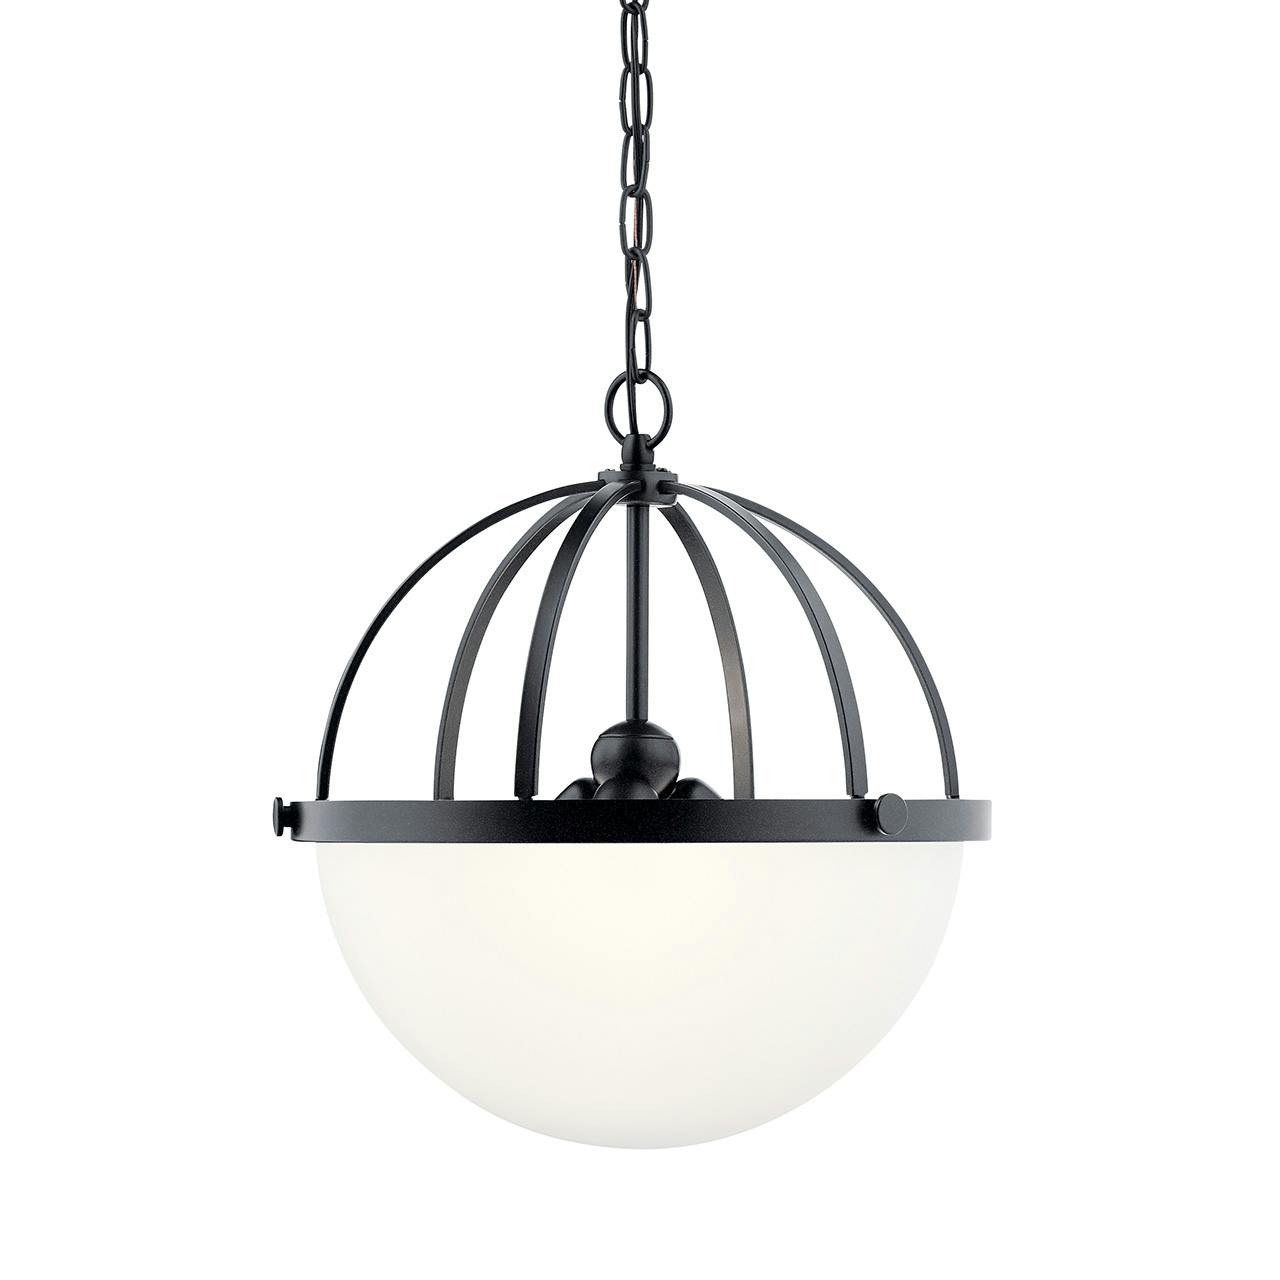 Edmar™ 3 Light Pendant in Black without the canopy on a white background